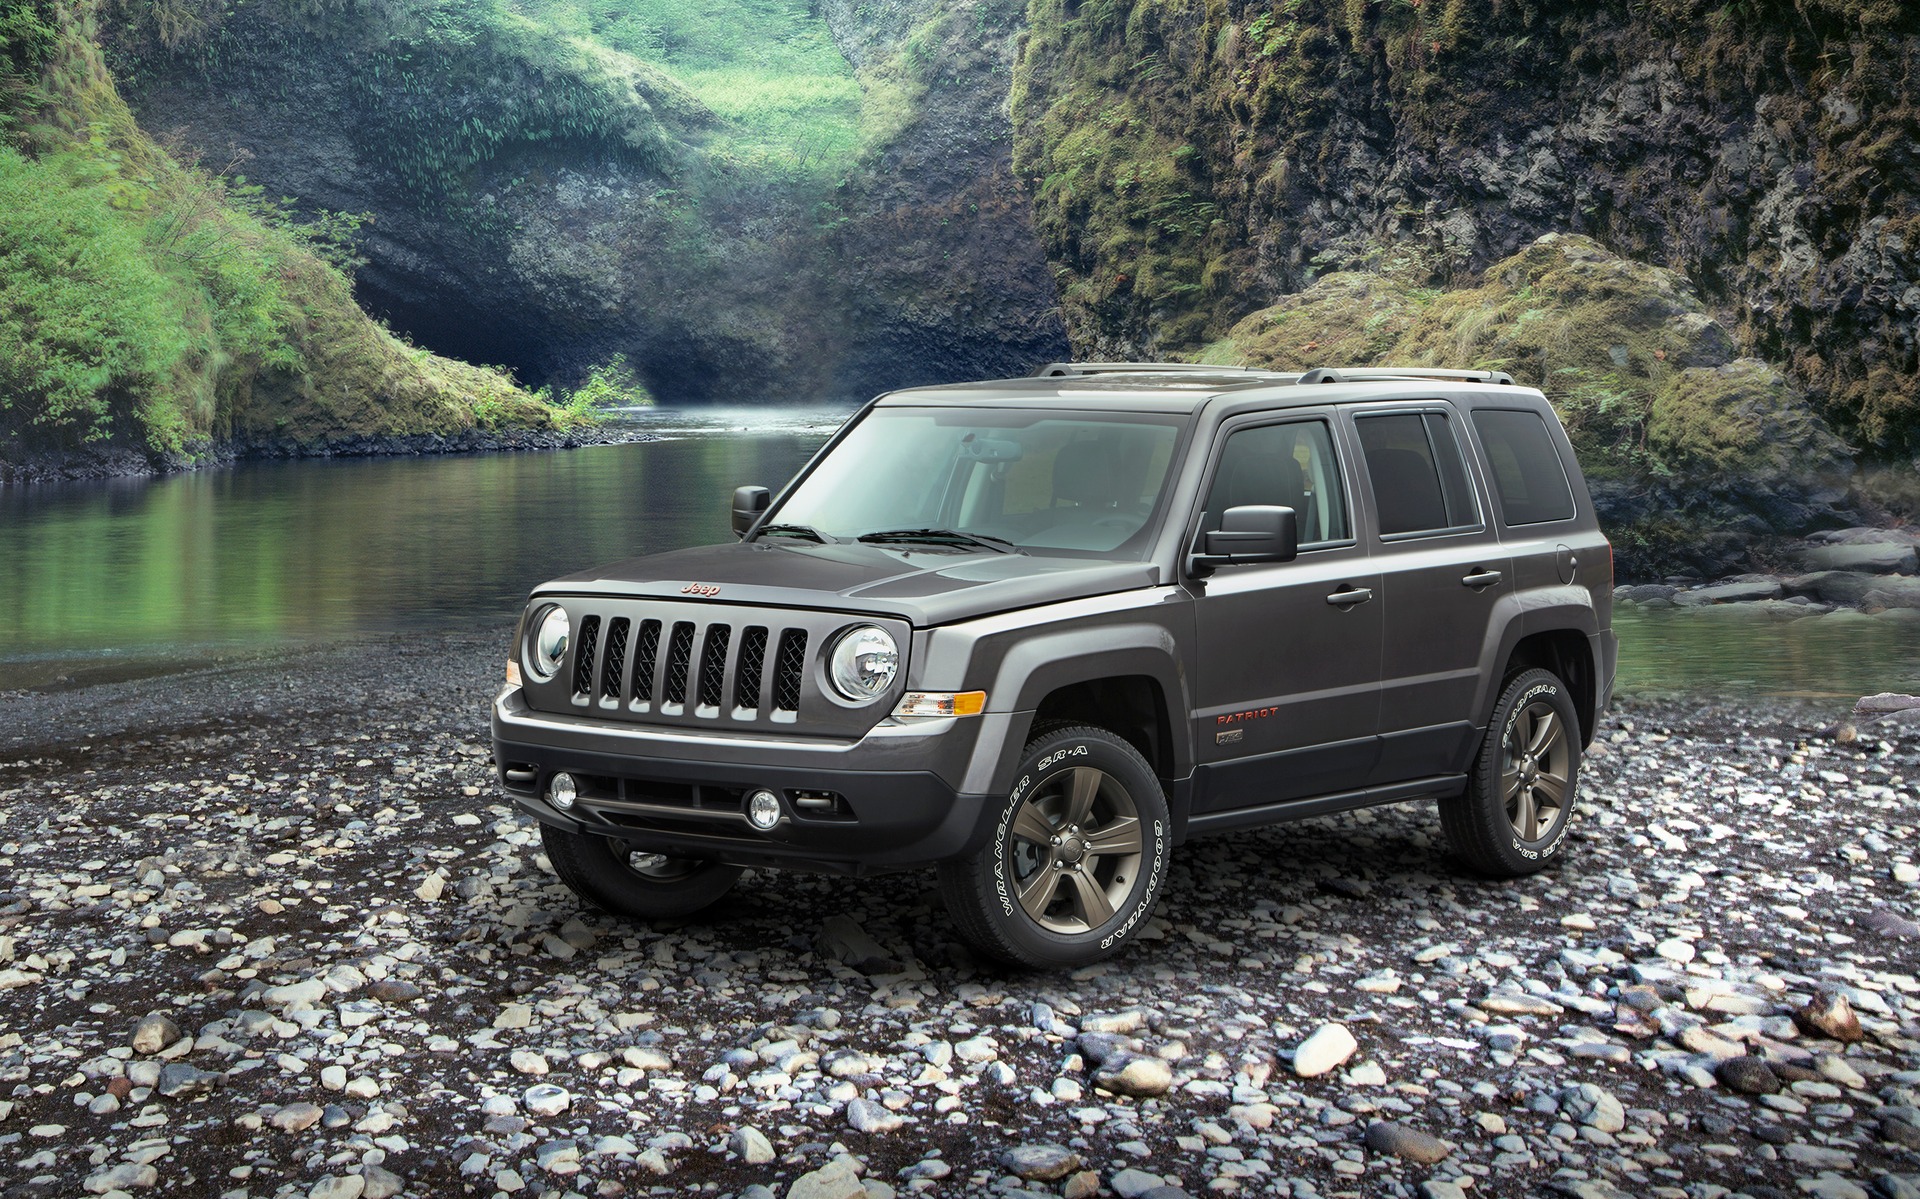 2017 Jeep Patriot News, reviews, picture galleries and videos The